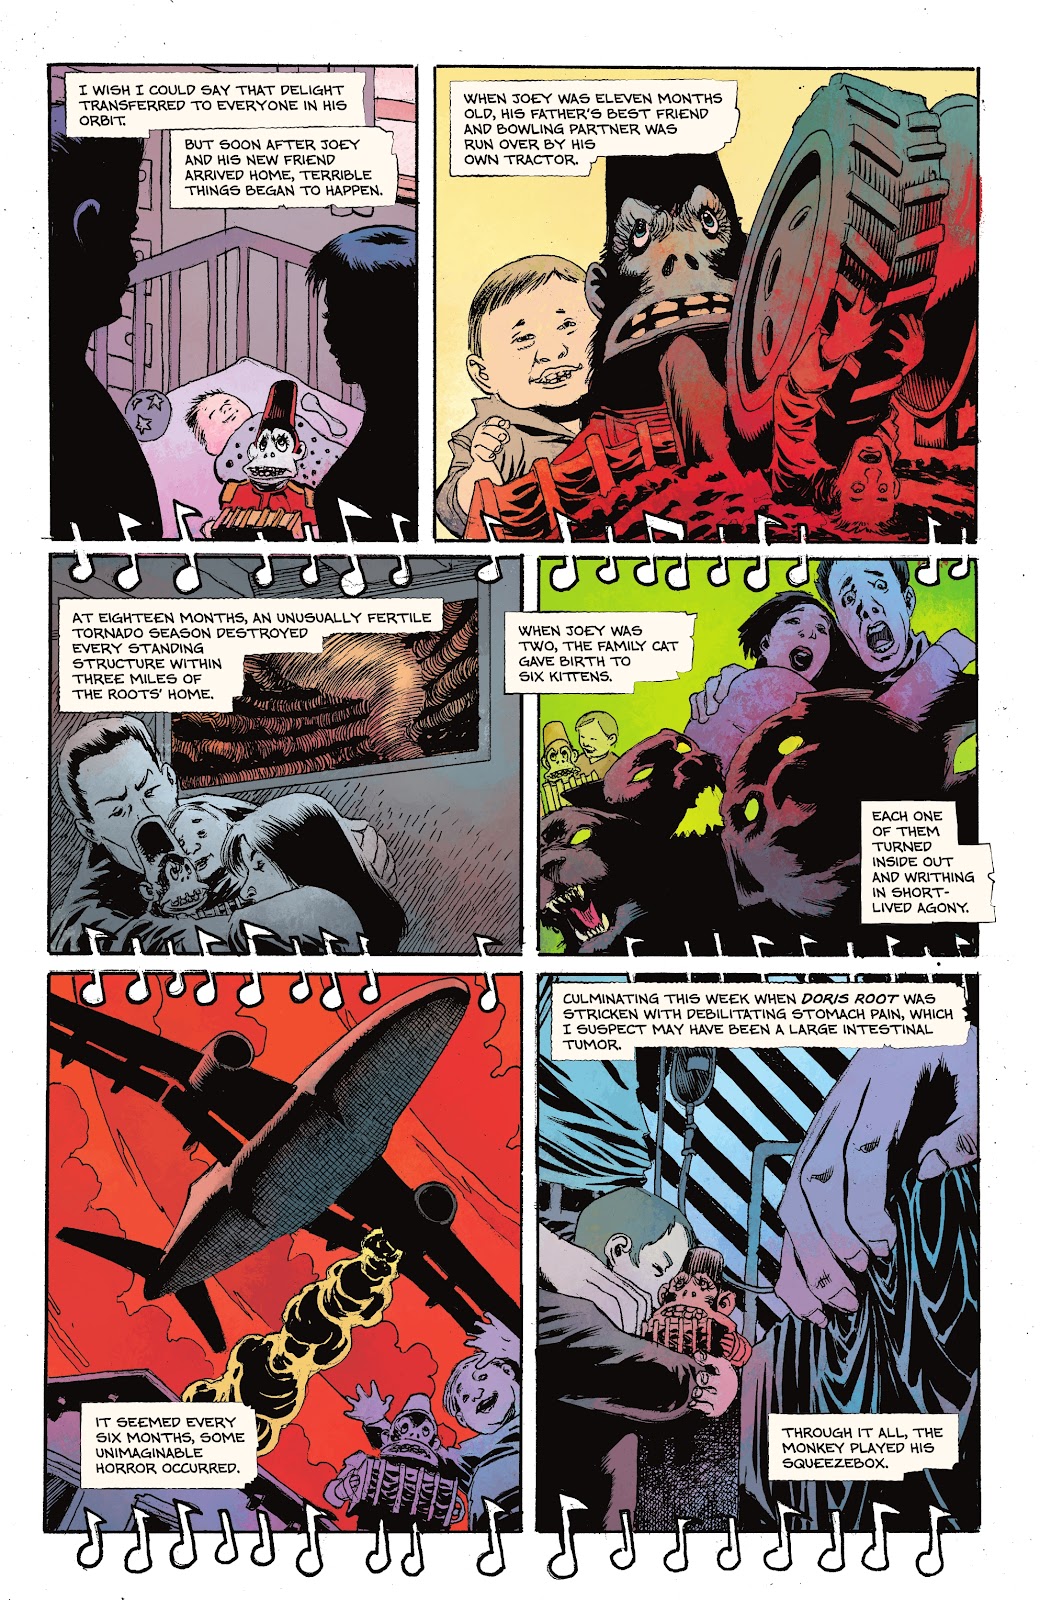 DC Horror Presents: The Conjuring: The Lover issue 3 - Page 22